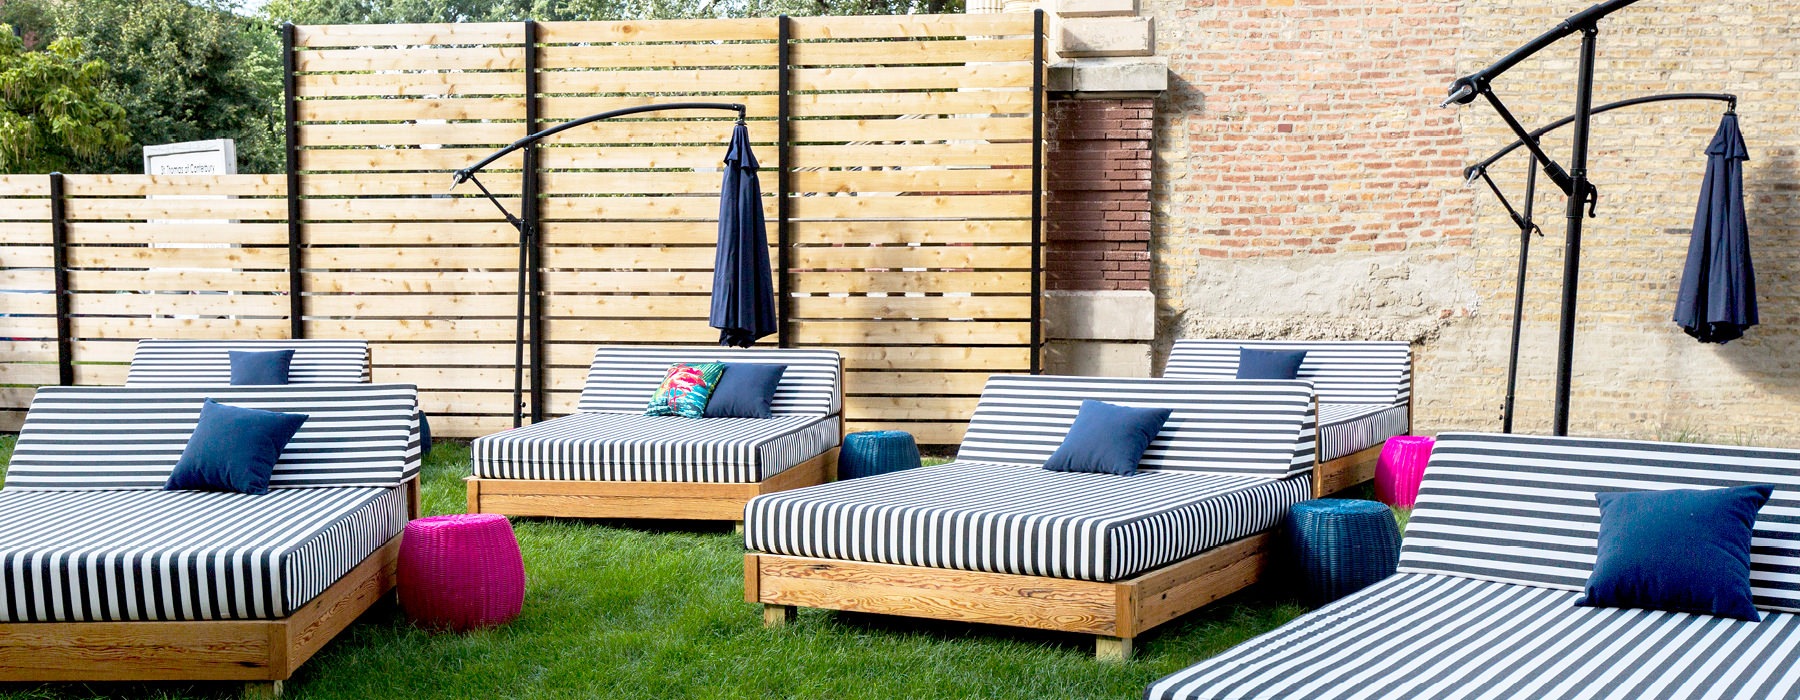 plush reclining loungers with umbrella shading in Backyard